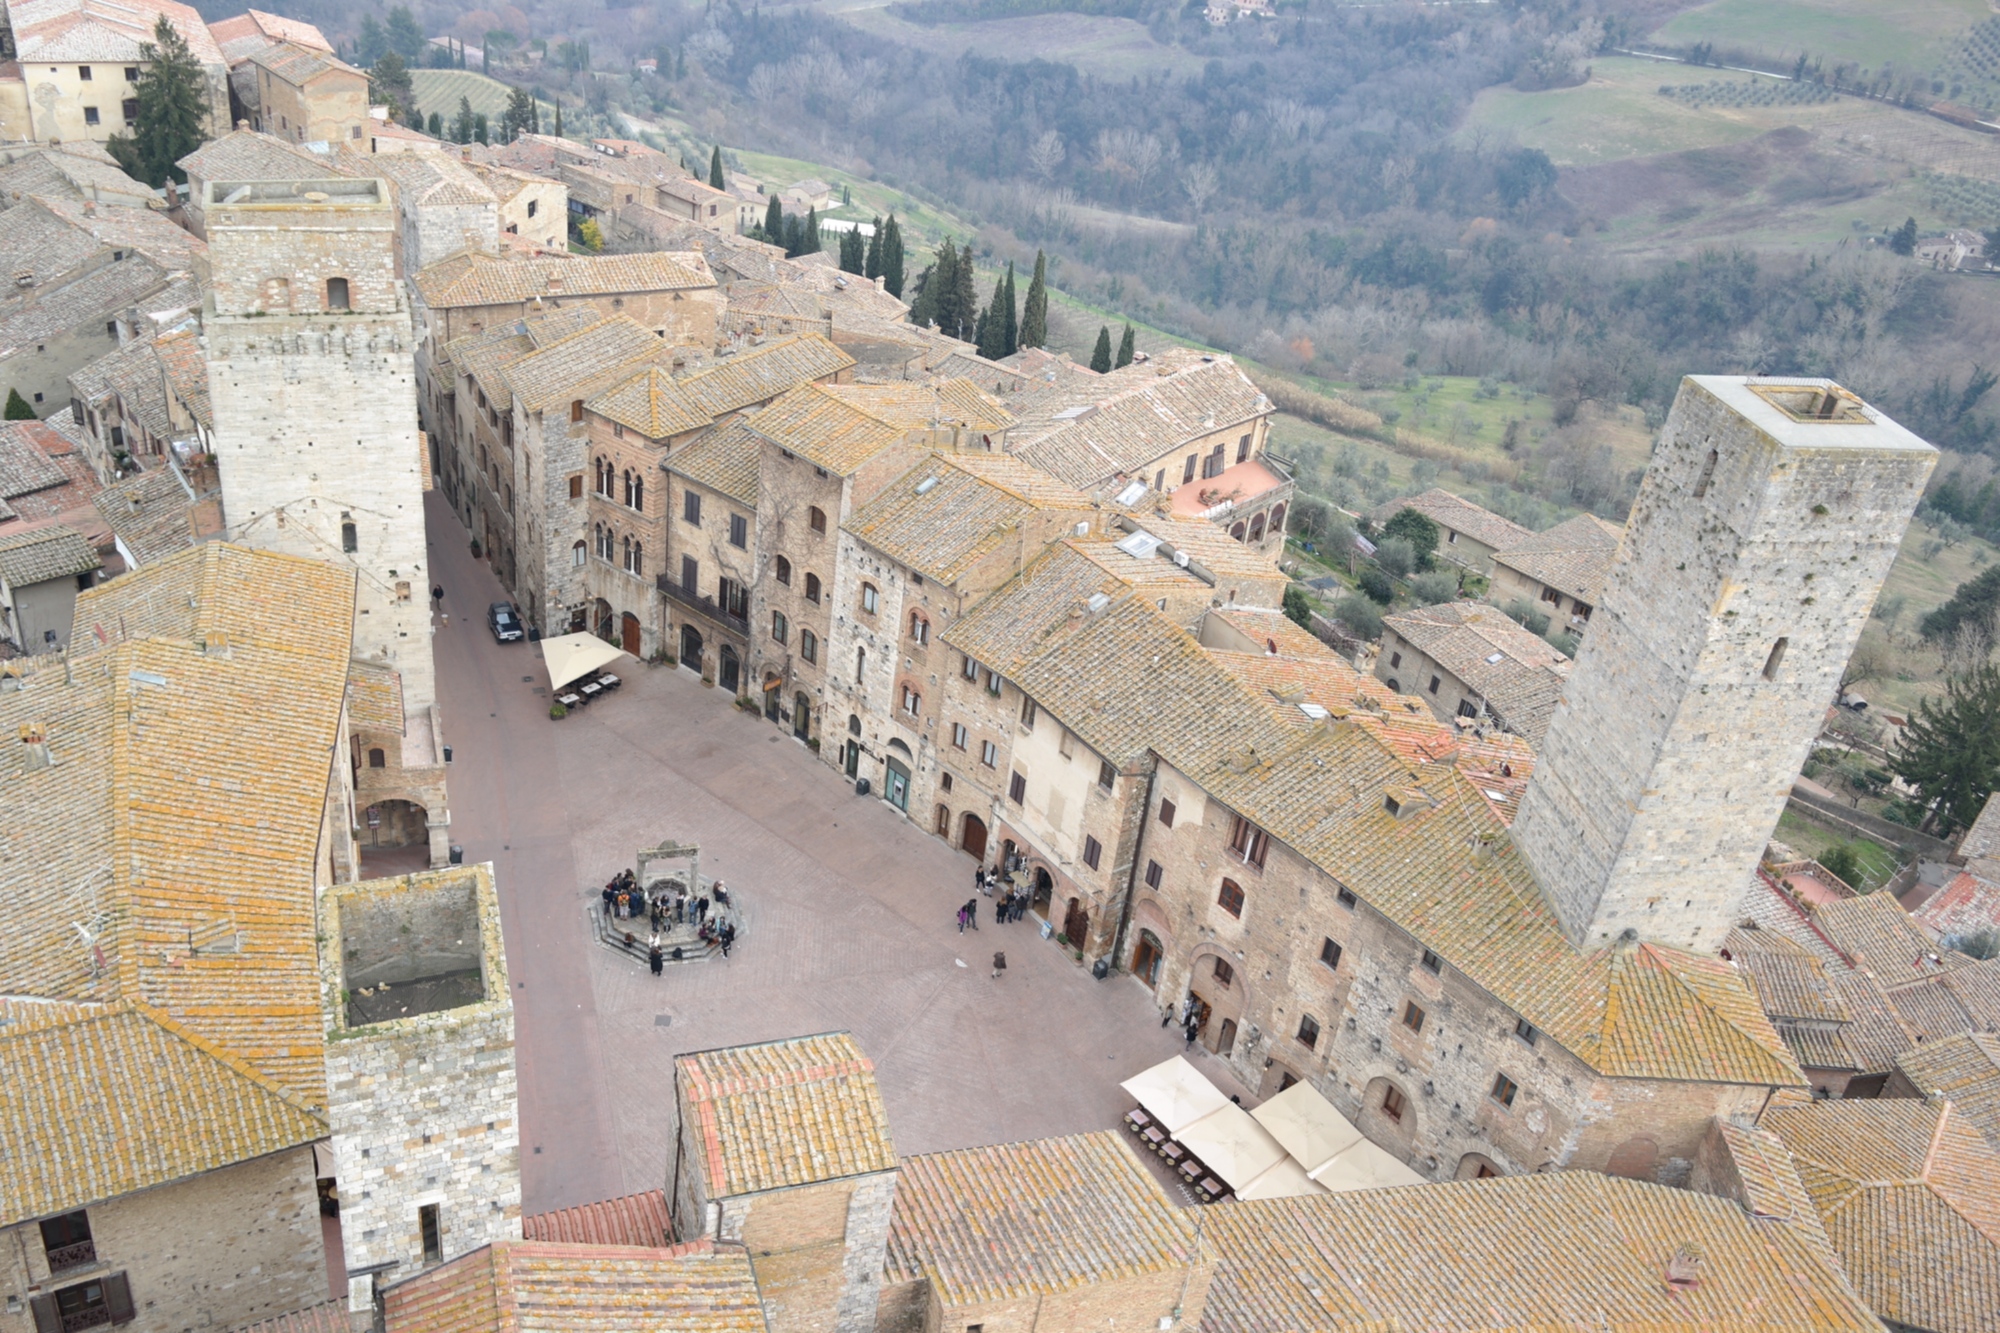 The view from Torre Grossa in San Gimignano